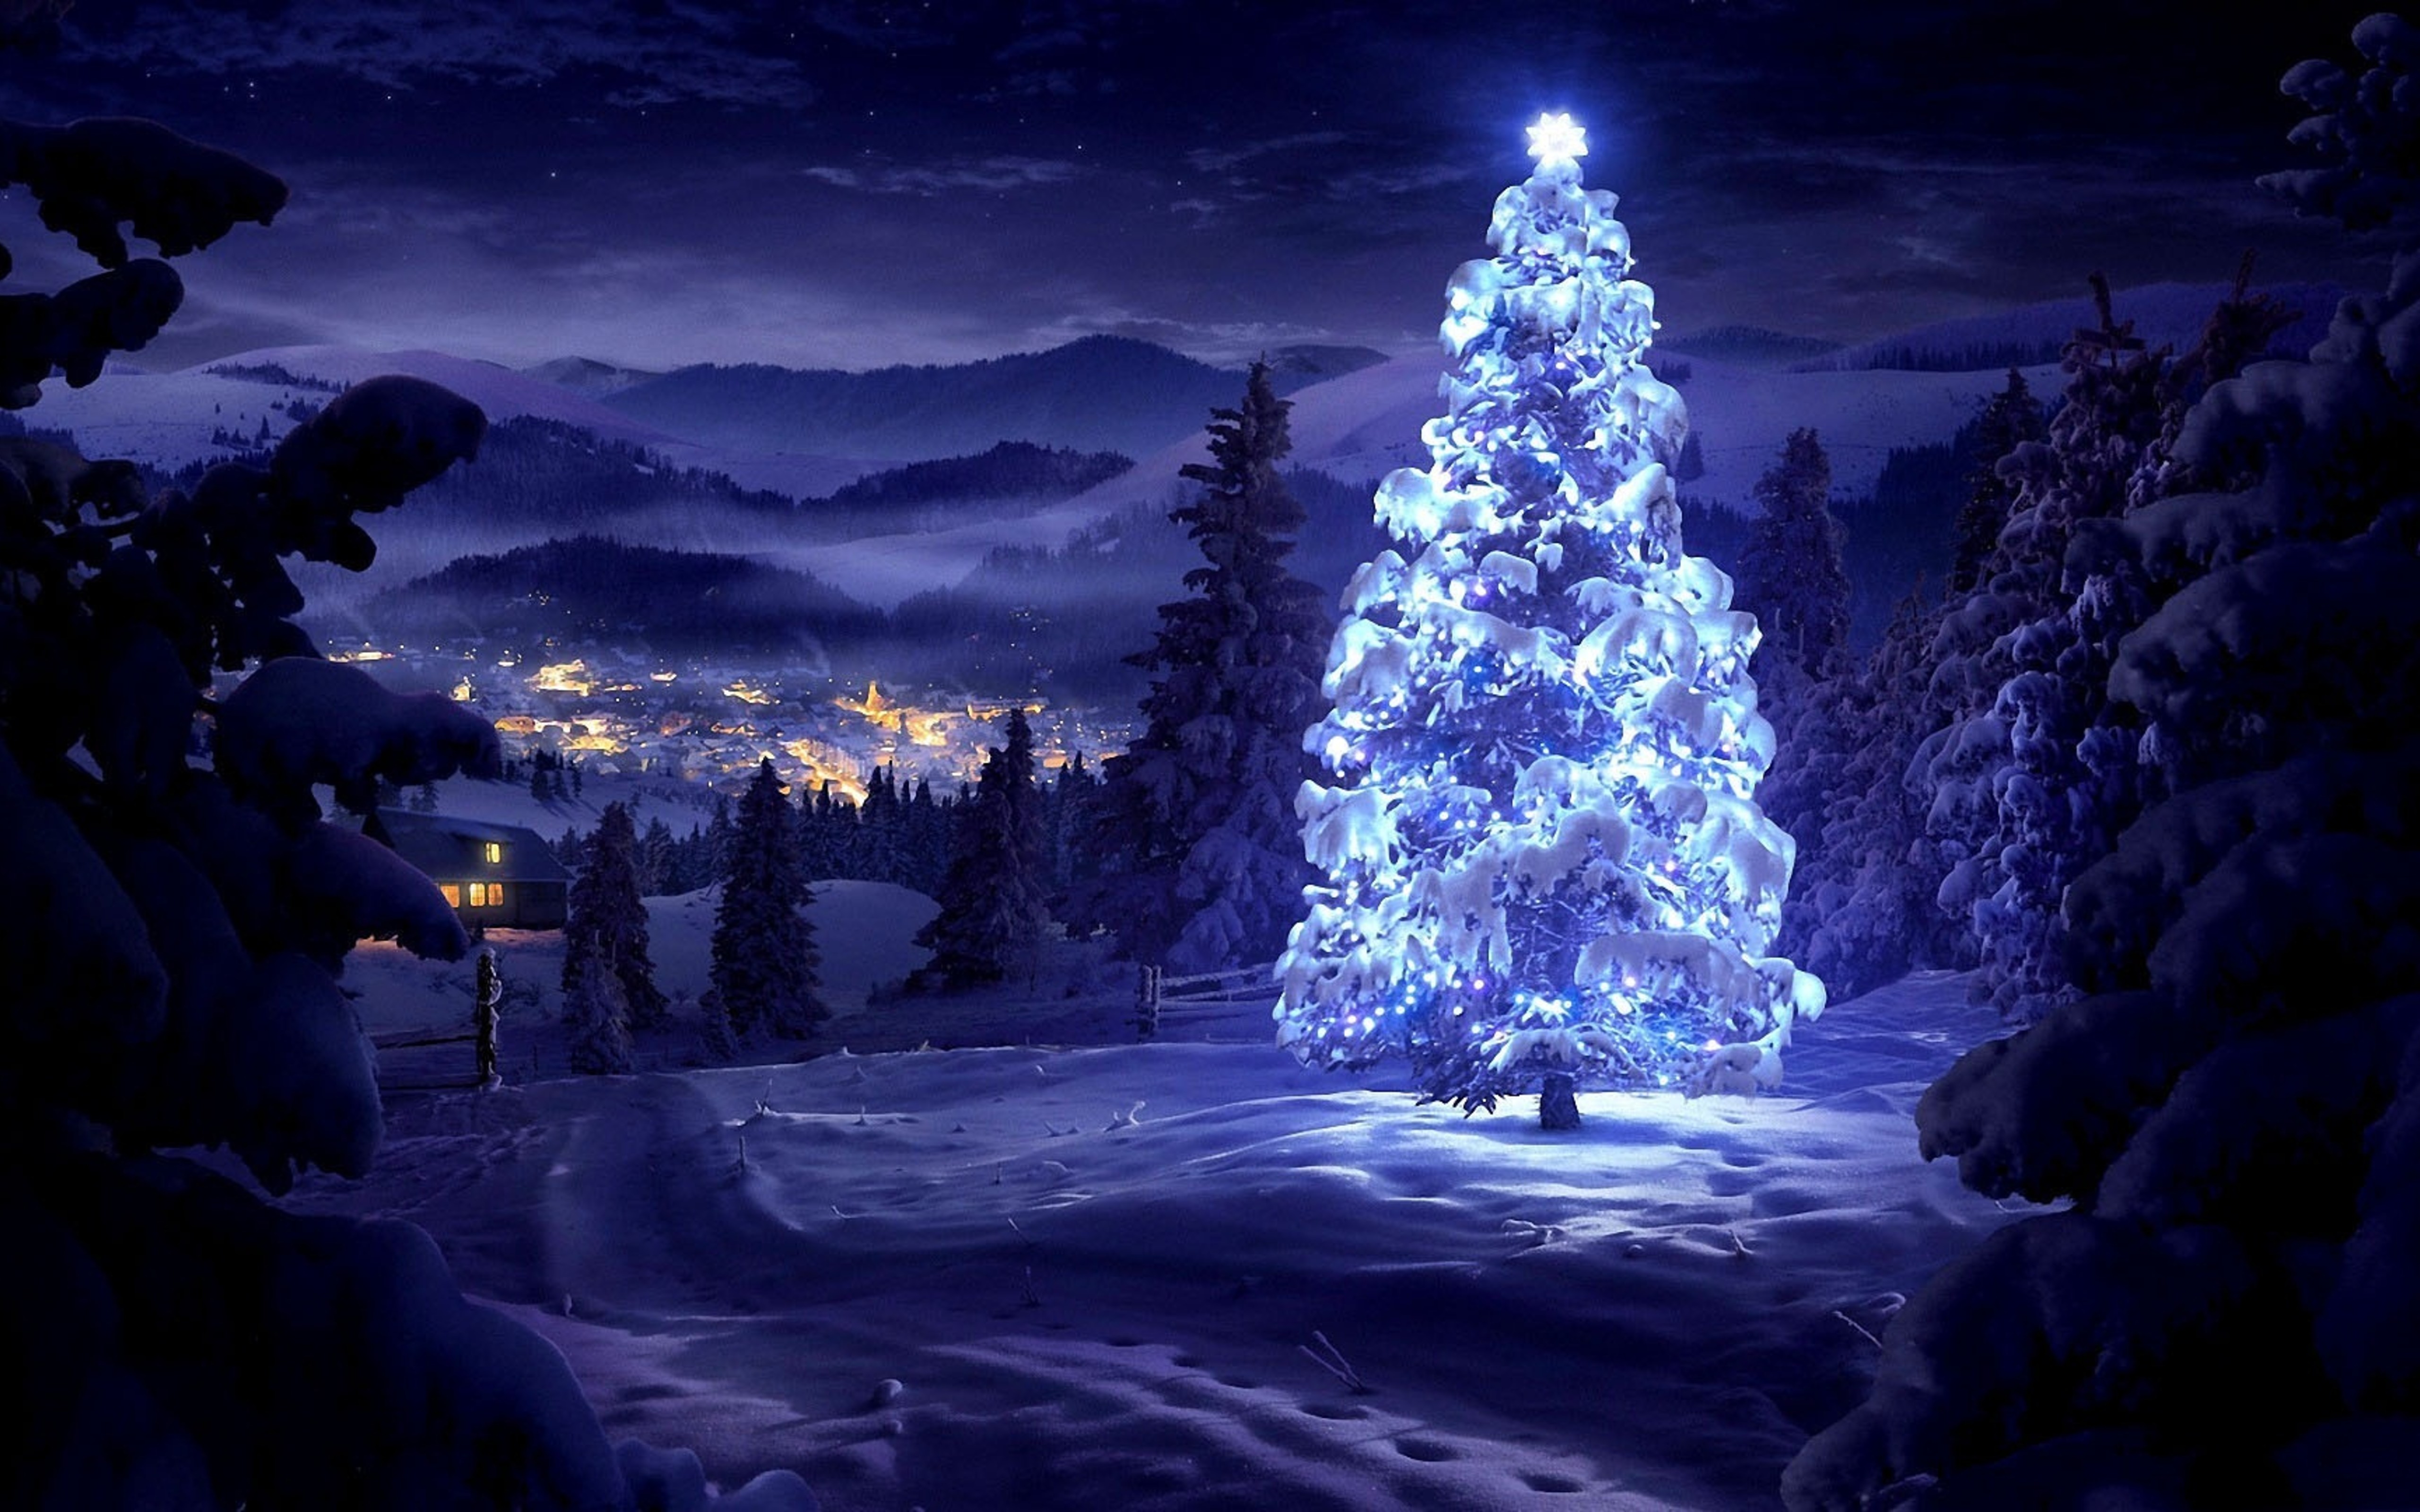 Wallpaper Download 1920x1080 Blue Christmas tree in the middle of